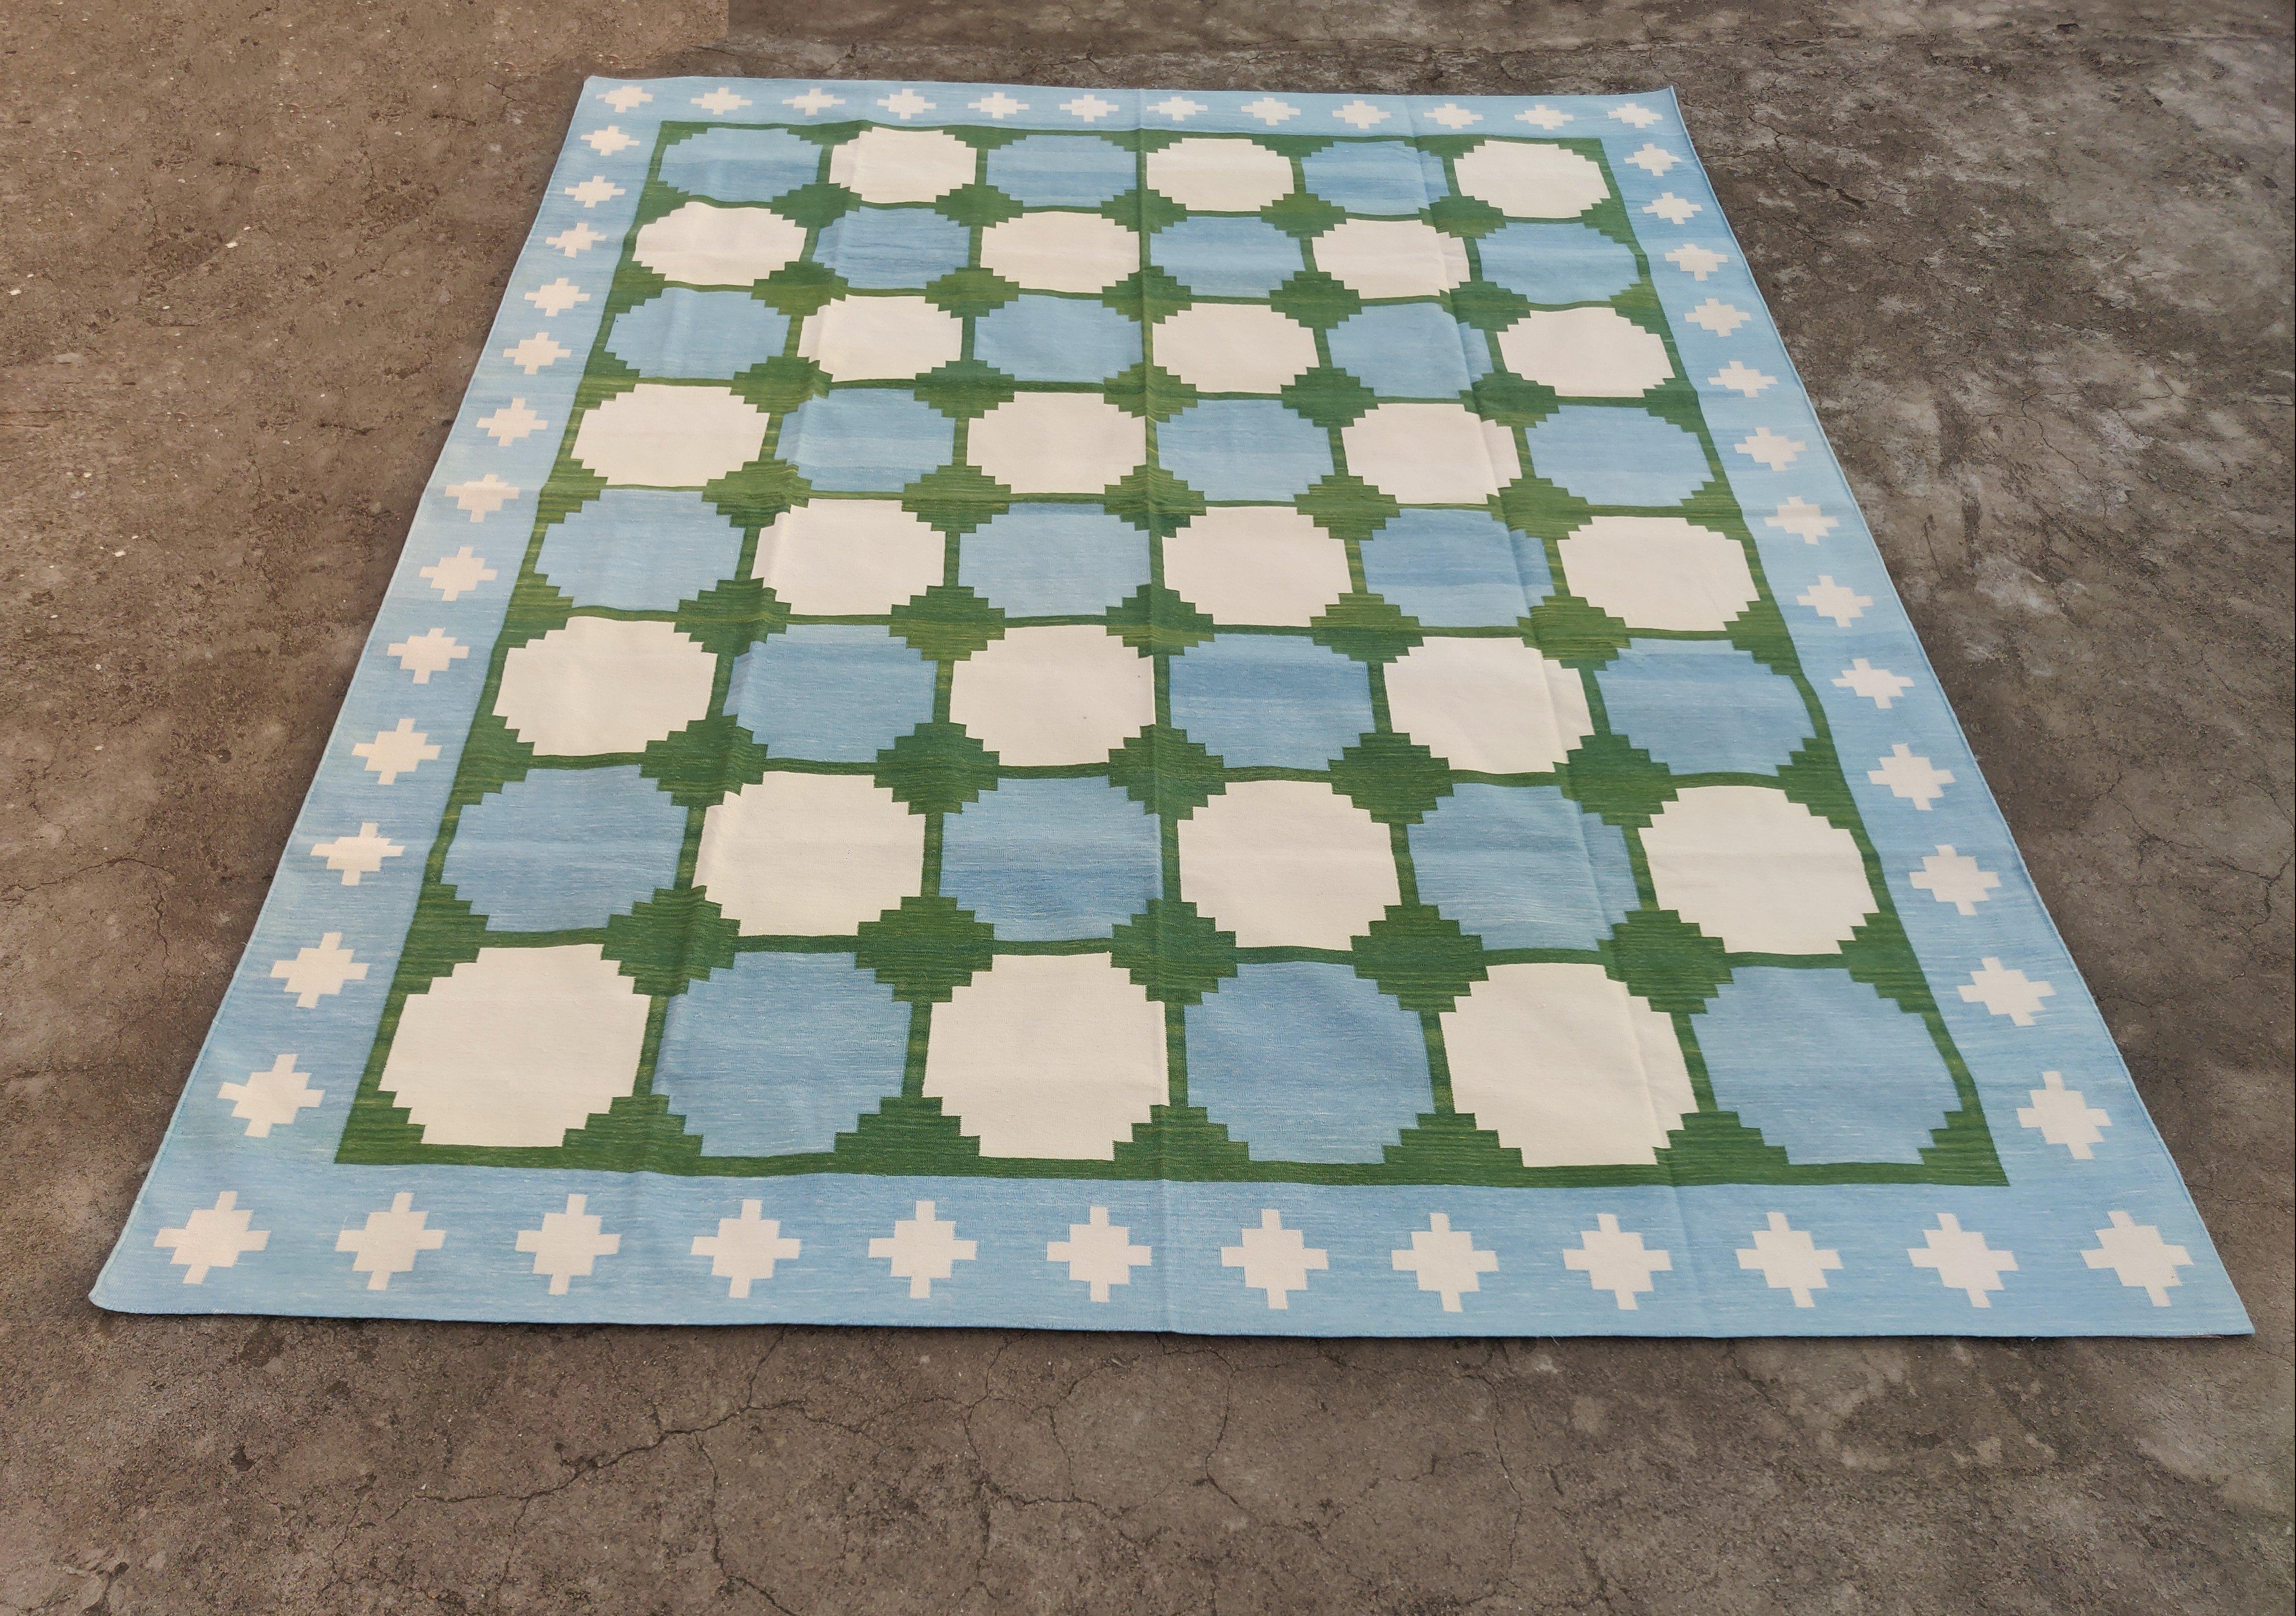 Handmade Cotton Flat Weave Rug, 9x12 Green And Blue Tile Pattern Indian Dhurrie For Sale 4